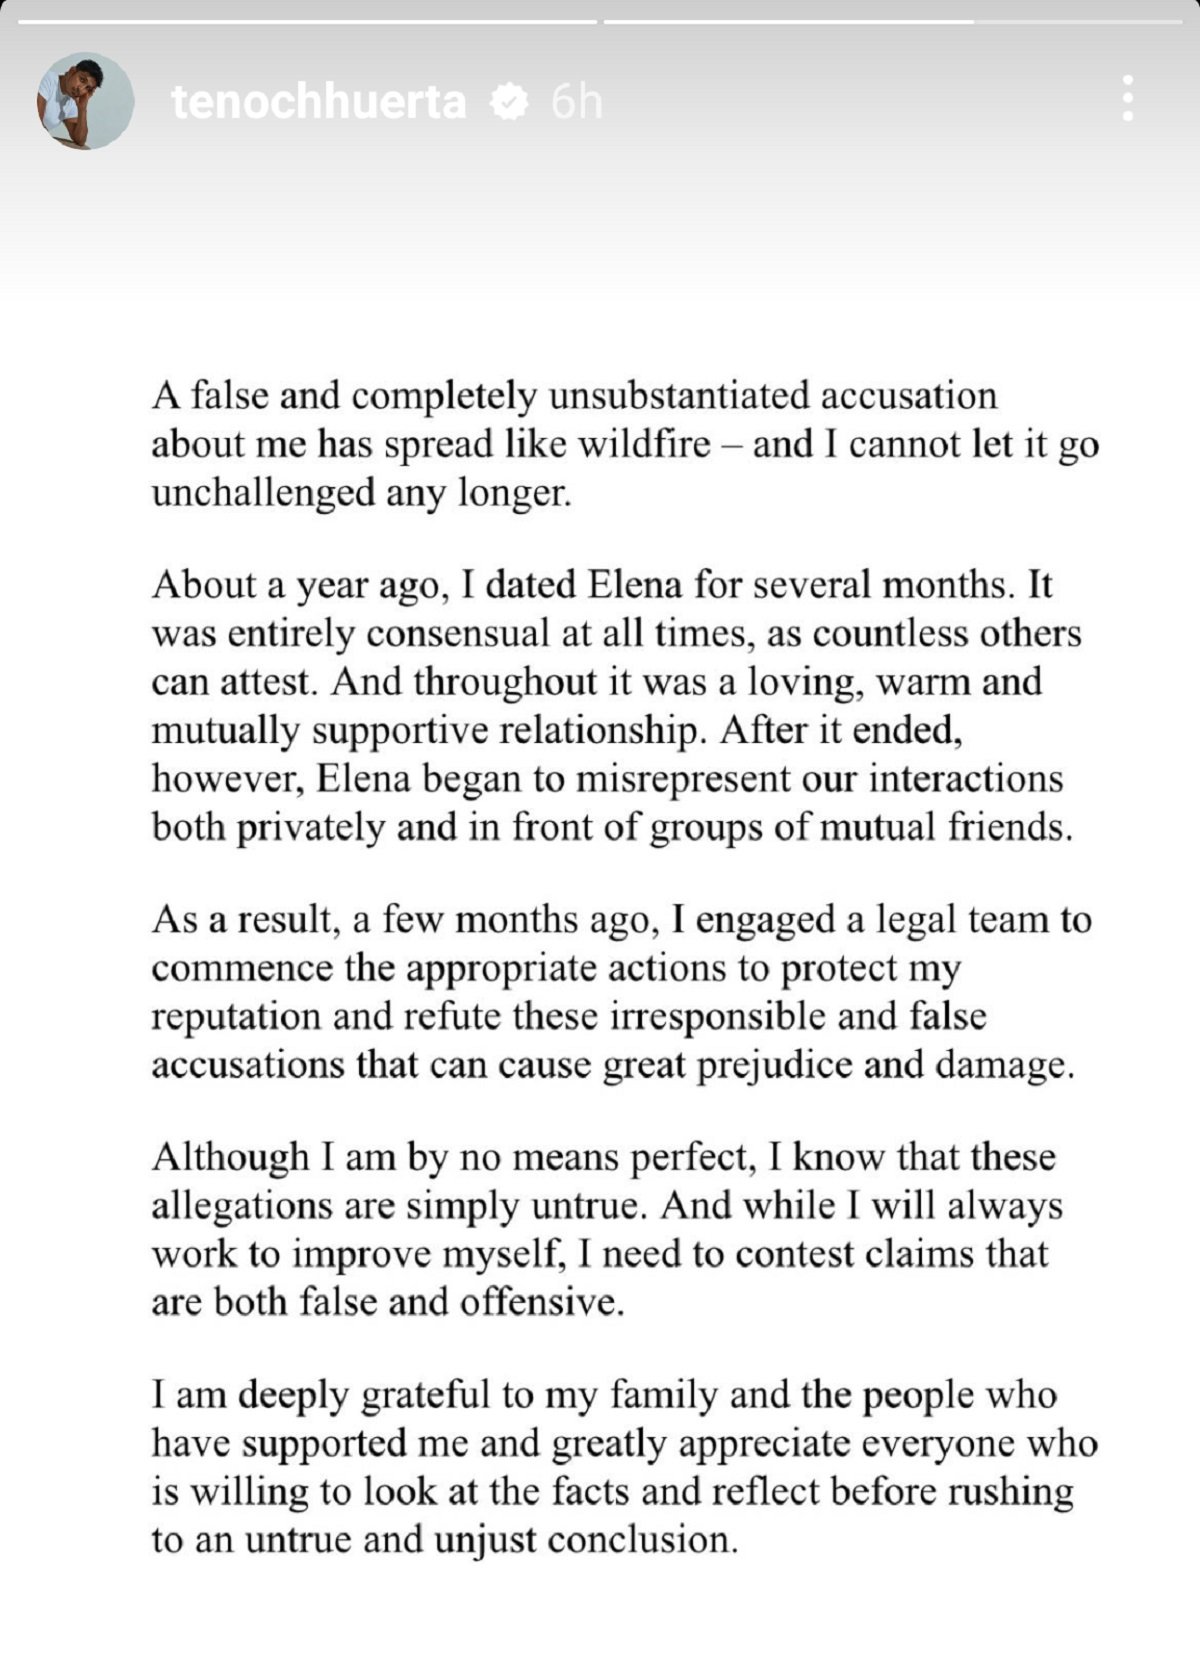 Screenshot of a written statement Tenoch Huerta posted to his Instagram stories on June 12, 2023 re: Maria Elena Rios. It reads:   "A false and completely unsubstantiated accusation about me has spread like wildfire - and I cannot let it go unchallenged any longer.   About a year ago, I dated Elena for several months. It was entirely consensual at all times, as countless others can attest. And throughout it was a loving, warm and mutually supportive relationship. After it ended, however, Elena began to misrepresent our interactions both privately and in front of groups of mutual friends.  As a result, a few months ago, I engaged a legal team to commence the appropriate actions to protect my reputation and refute these irresponsible and false accusations that can cause great prejudice and damage. Although I am by no means perfect, I know that these allegations are simply untrue. And while I will always work to improve myself, I need to contest claims that are both false and offensive.  I am deeply grateful to my family and the people who have supported me and greatly appreciate everyone who is willing to look at the facts and reflect before rushing to an untrue and unjust conclusion."